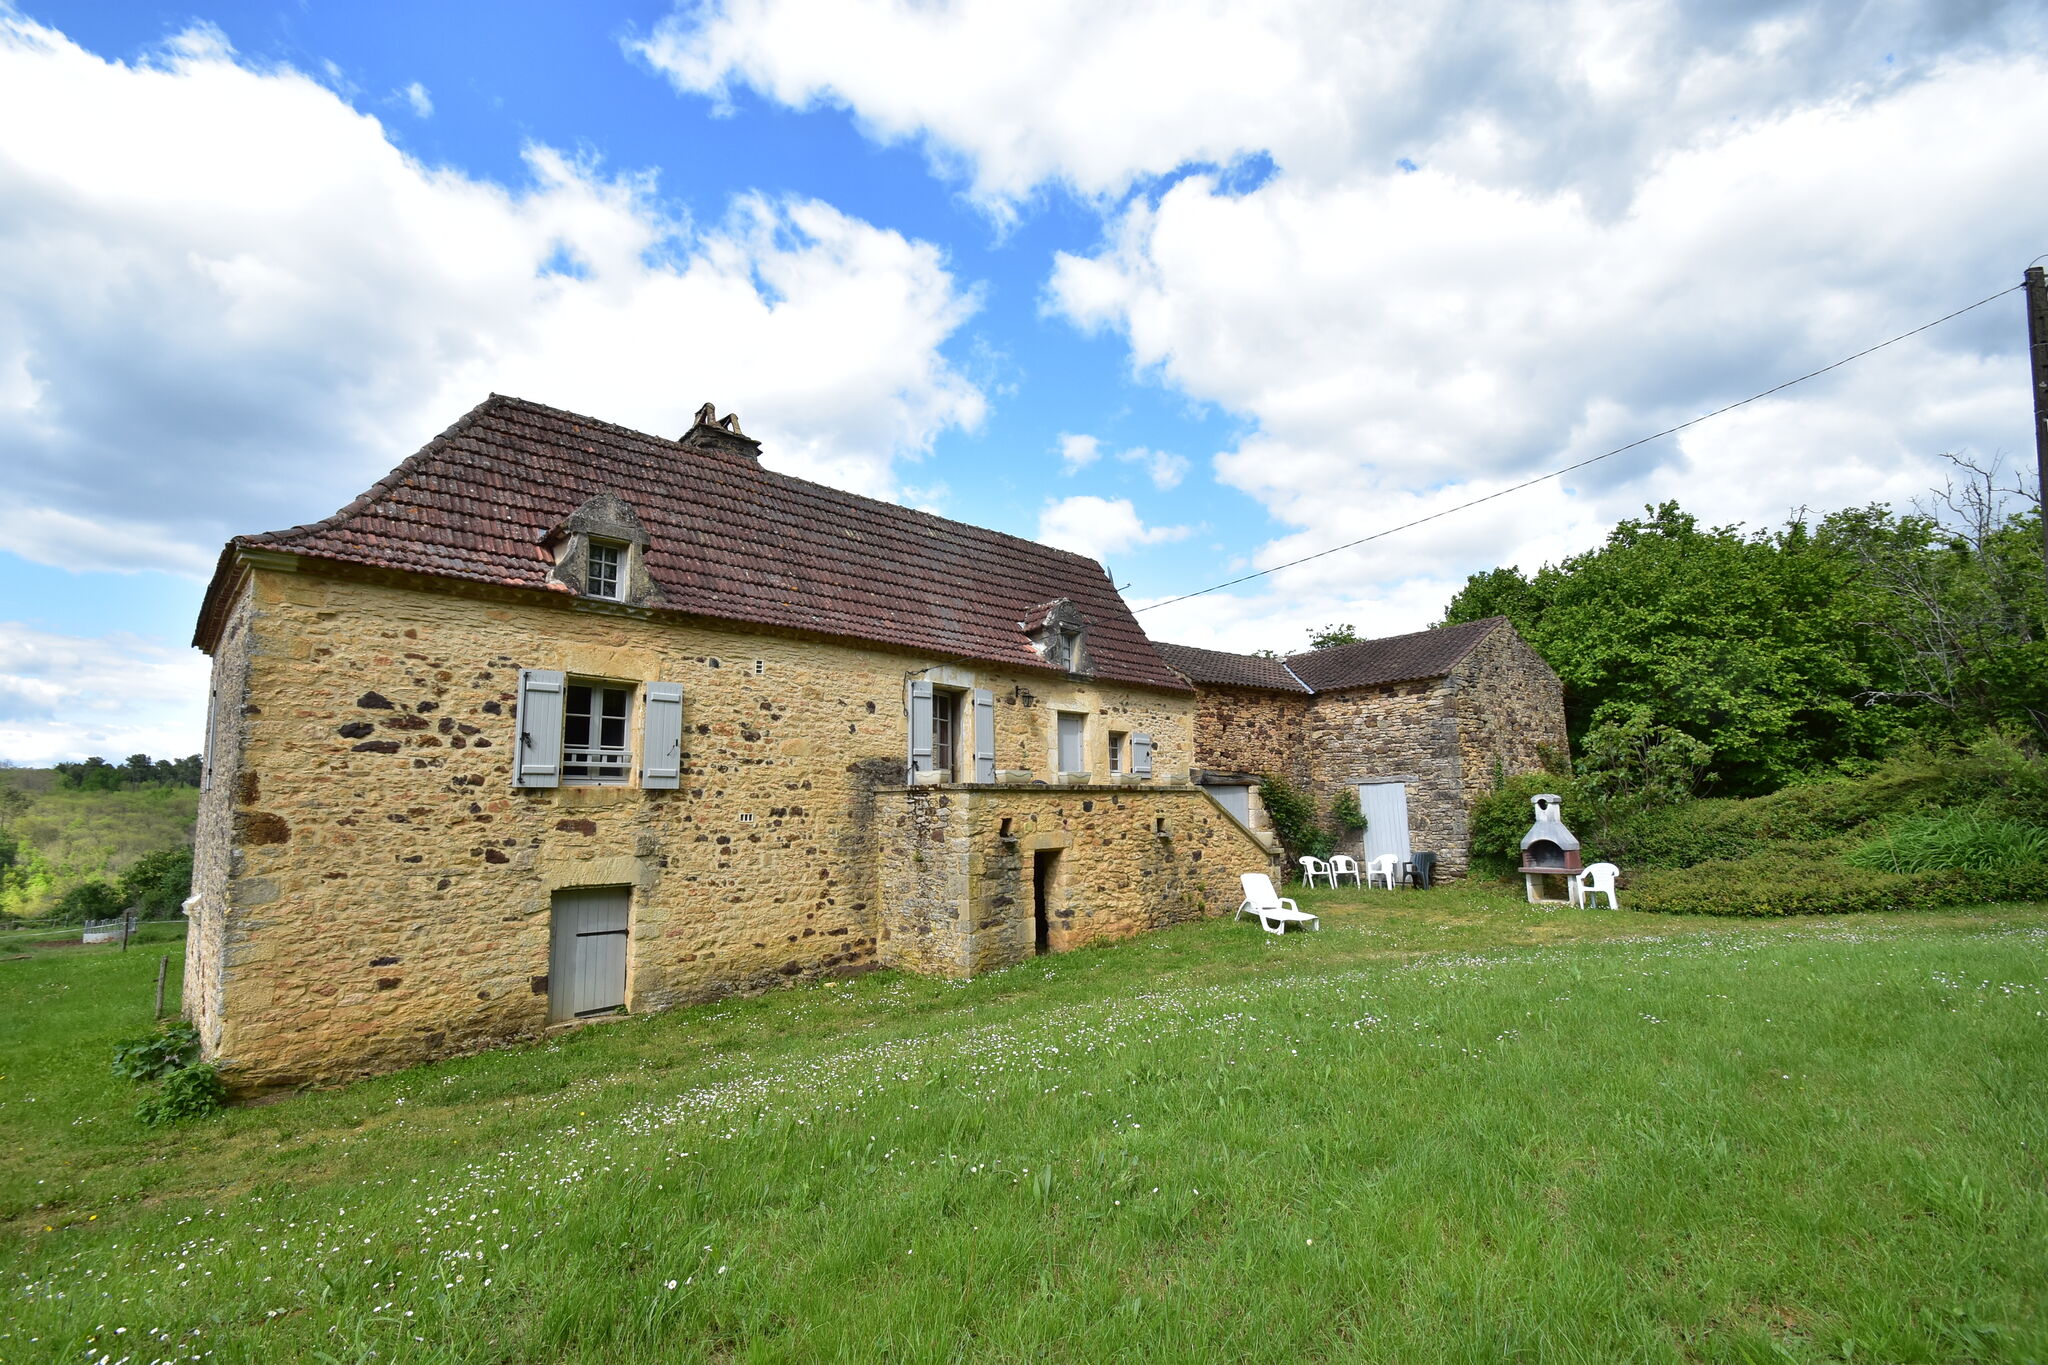 Beautiful holiday home in wooded grounds near Villefranche-du-Périgord (7 km)